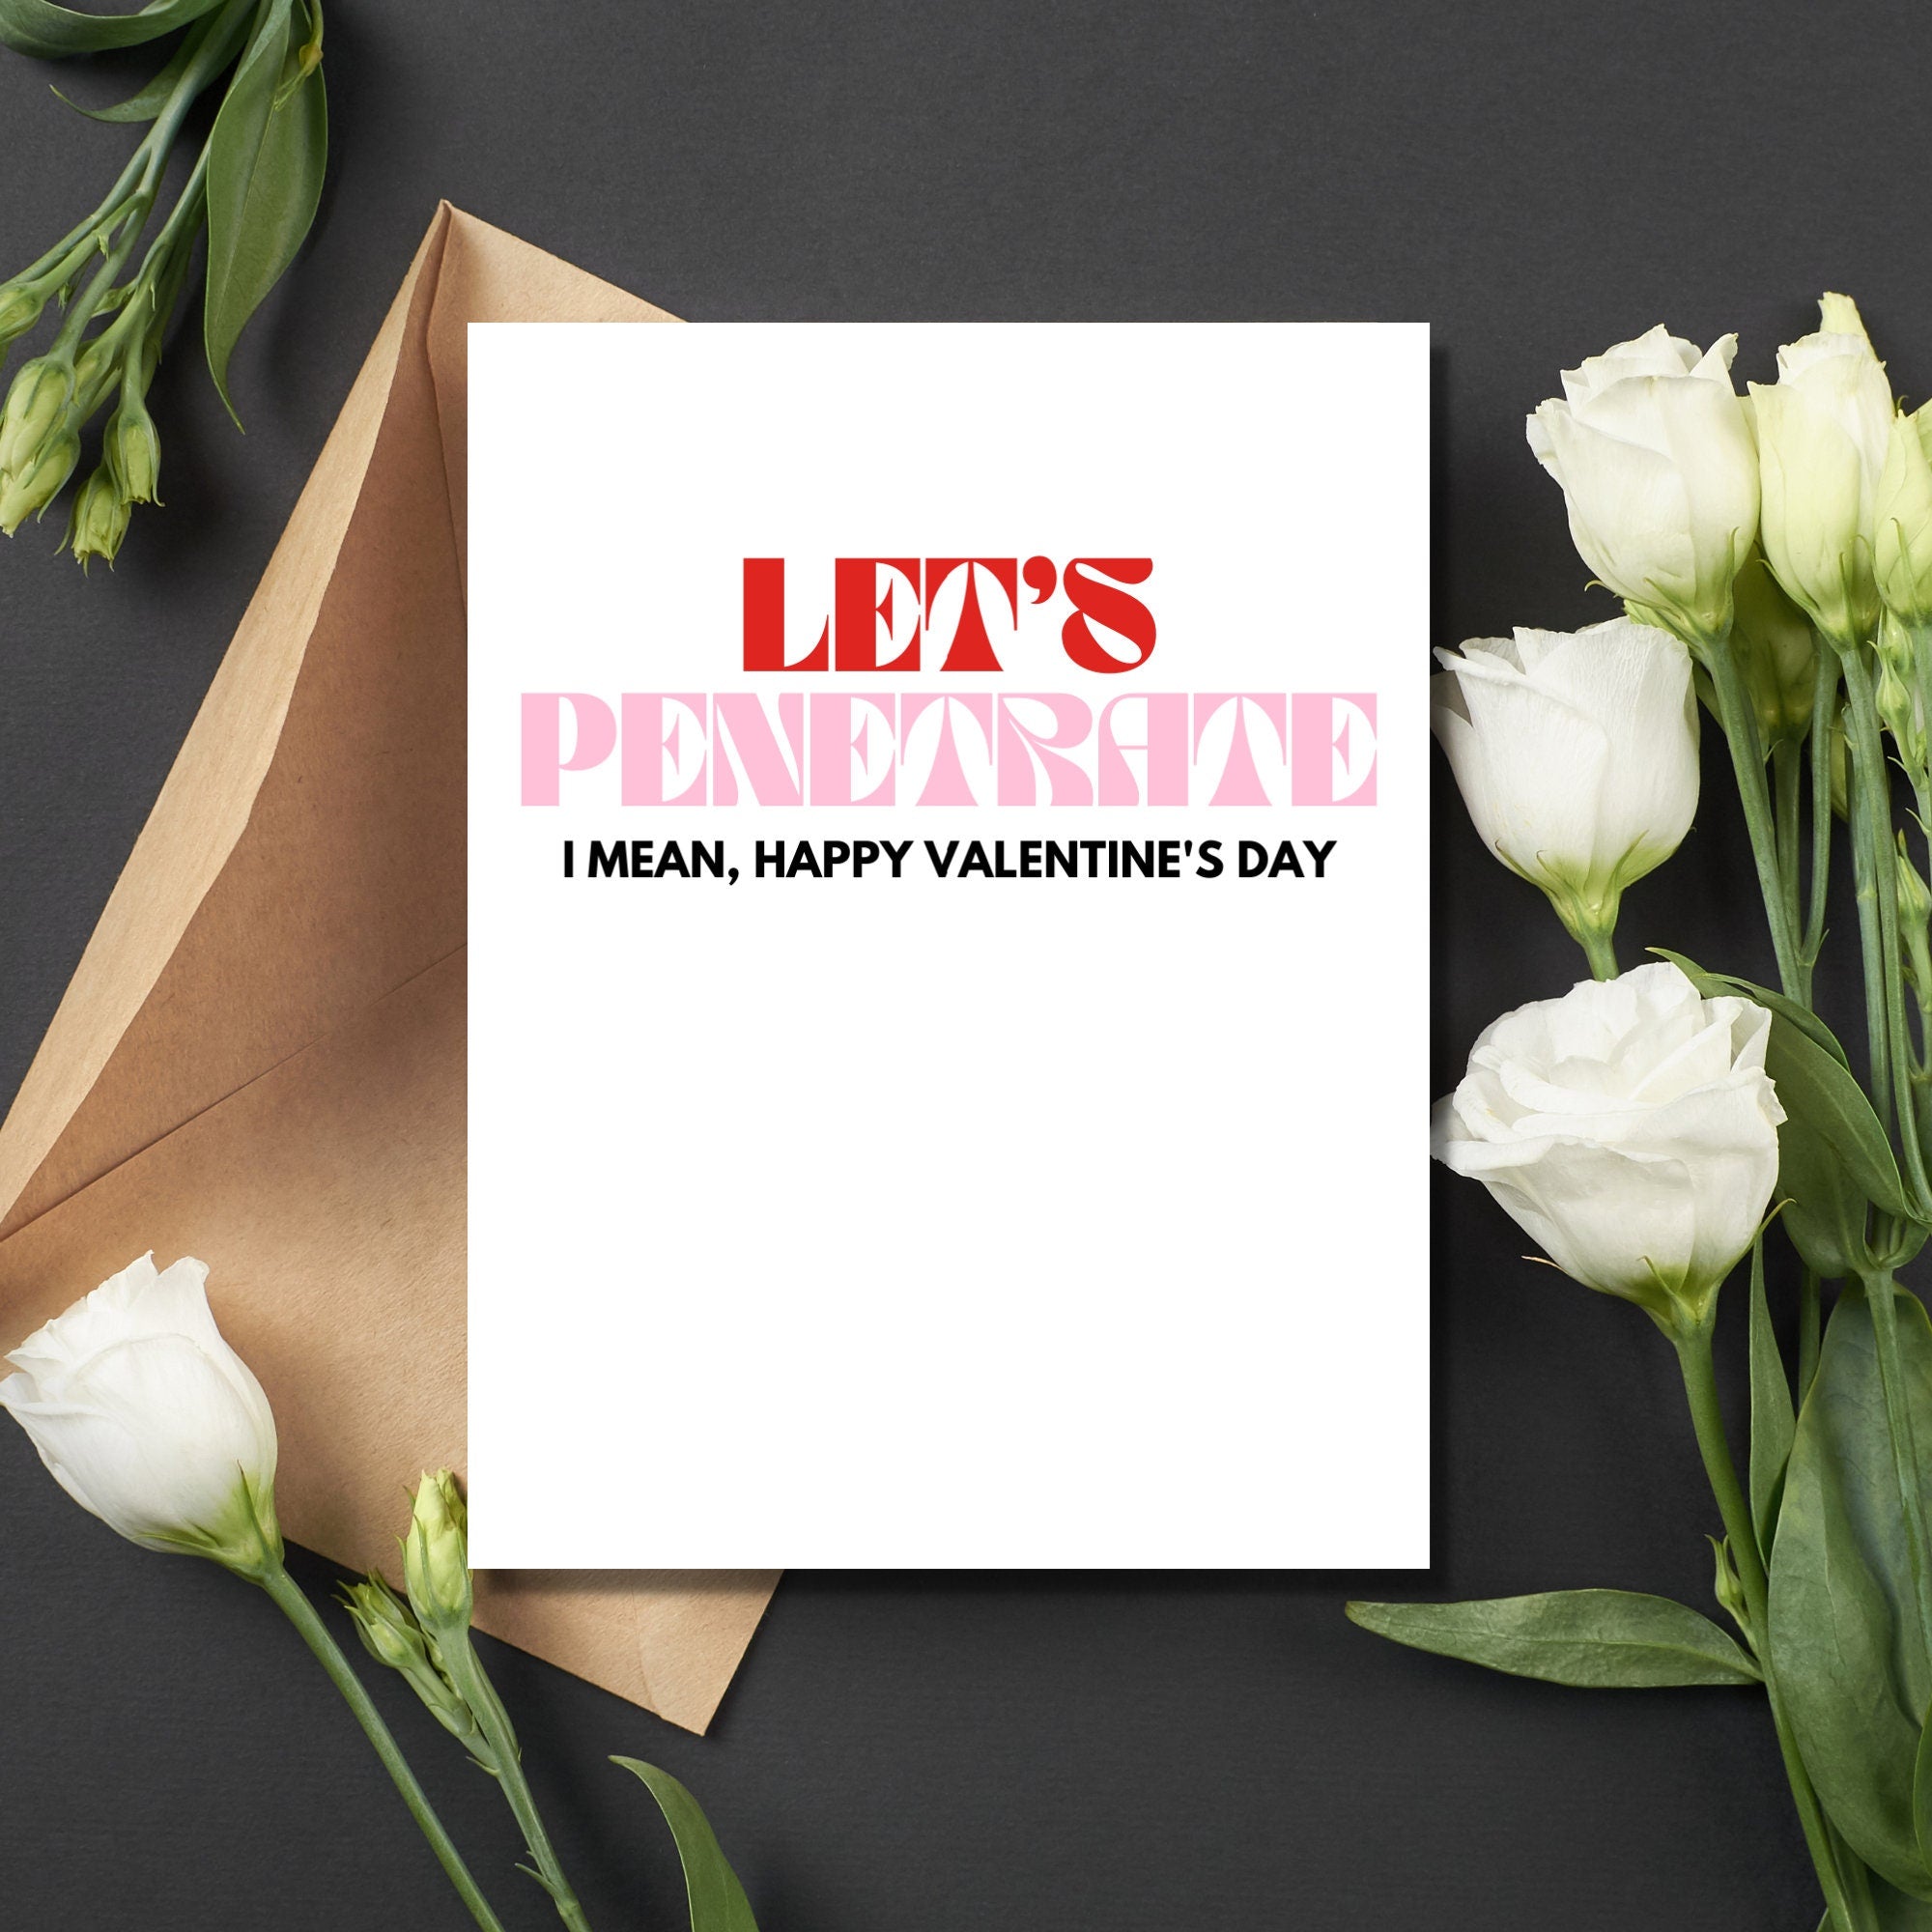 Let's Penetrate Valentine's Day Card